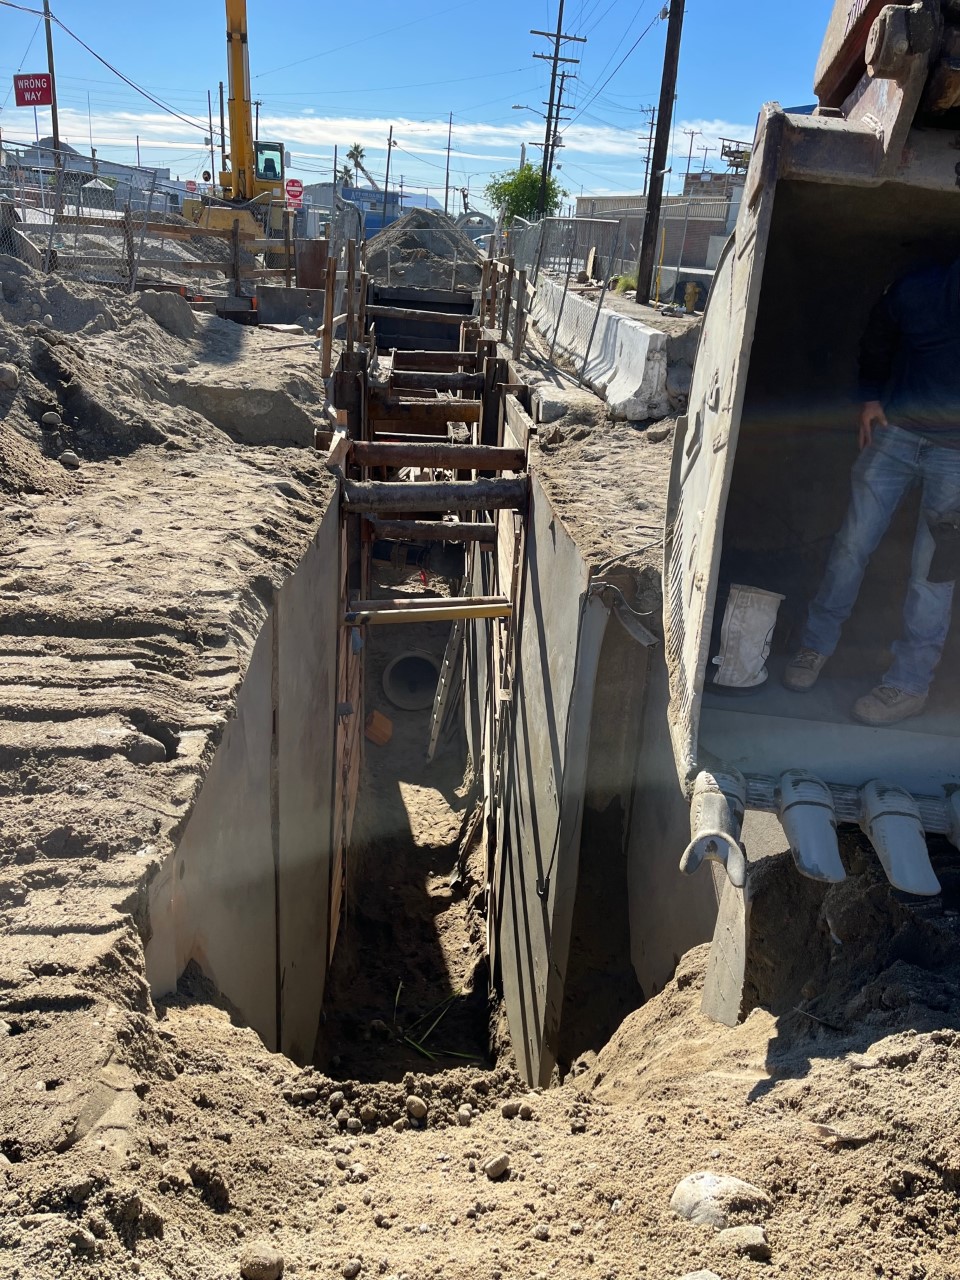 36 in RCP Installation and Shoring-Along Tujunga Ave